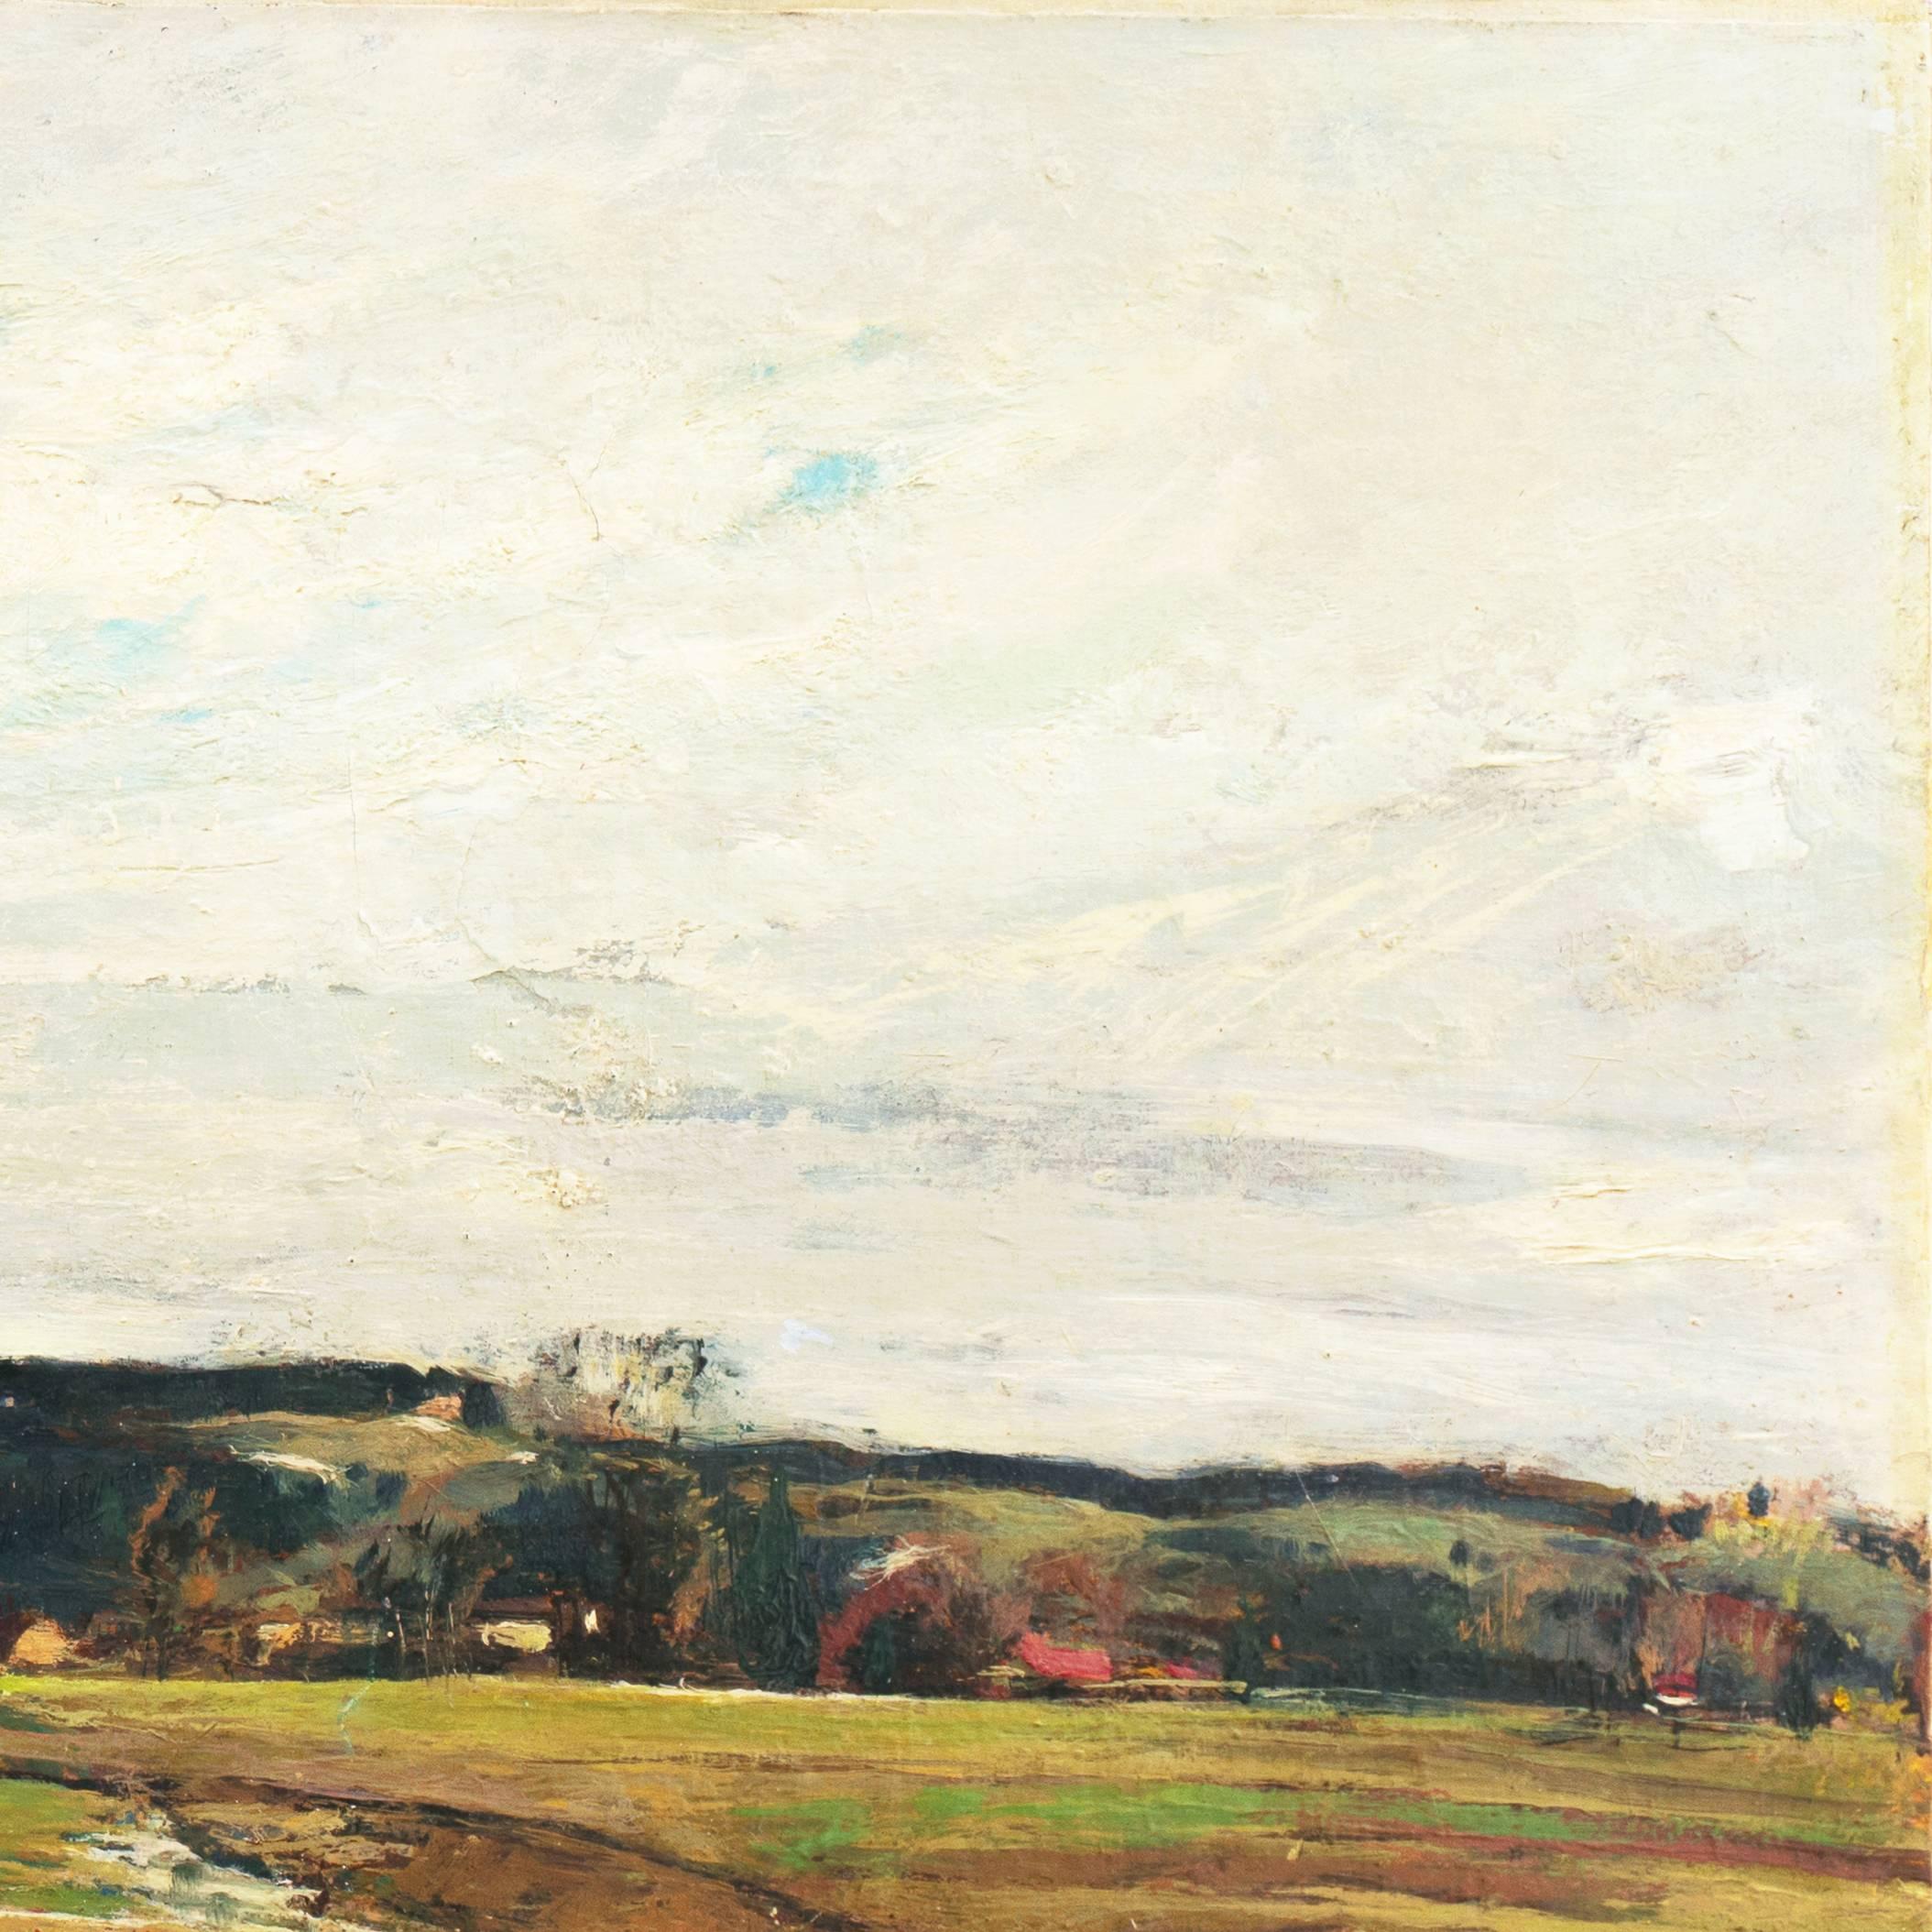 Signed lower right, 'Csanki' for Denes Csanki (Hungarian, 1885-1972) and painted circa 1935.

A substantial and atmospheric landscape showing a panoramic view of the Hungarian countryside in the early spring with wild flowers blooming and ice still